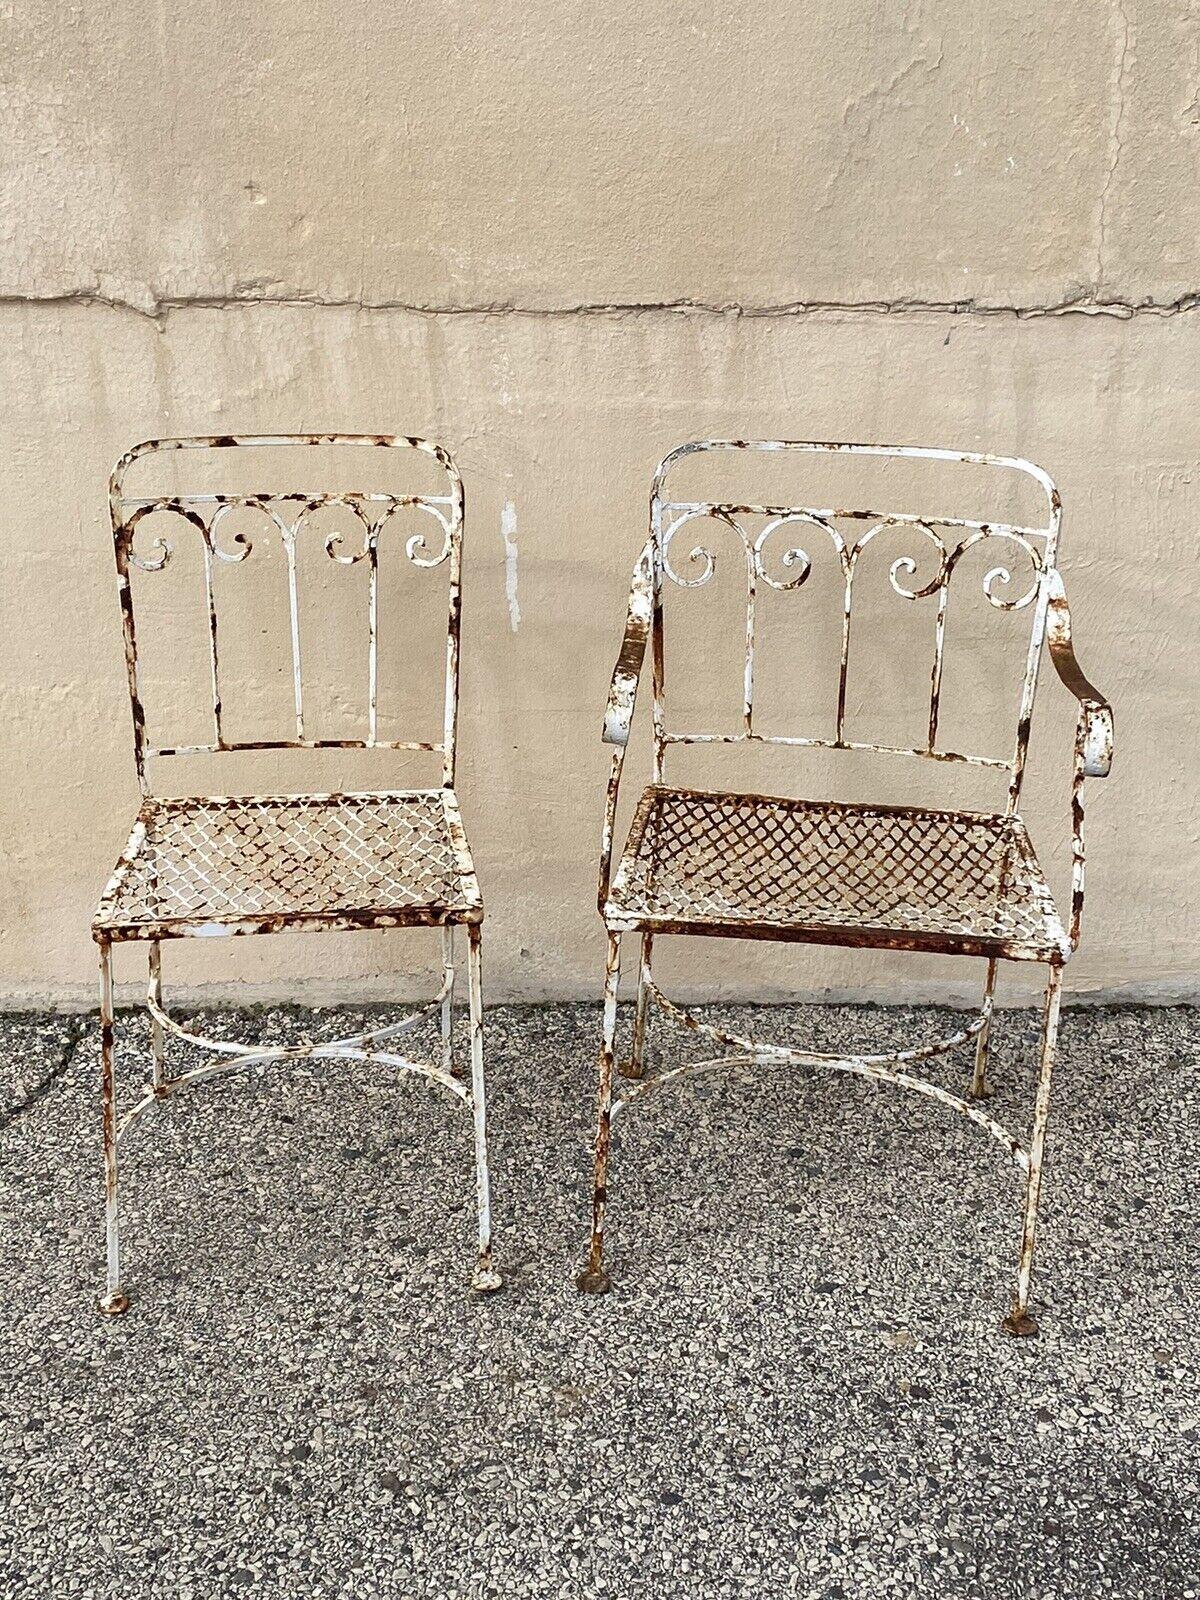 Antique Art Nouveau Scrolling Wrought Iron Garden Patio Dining Chairs - A Pair. Circa Early to Mid 20th Century.
Measurements: 
Armchair: 31